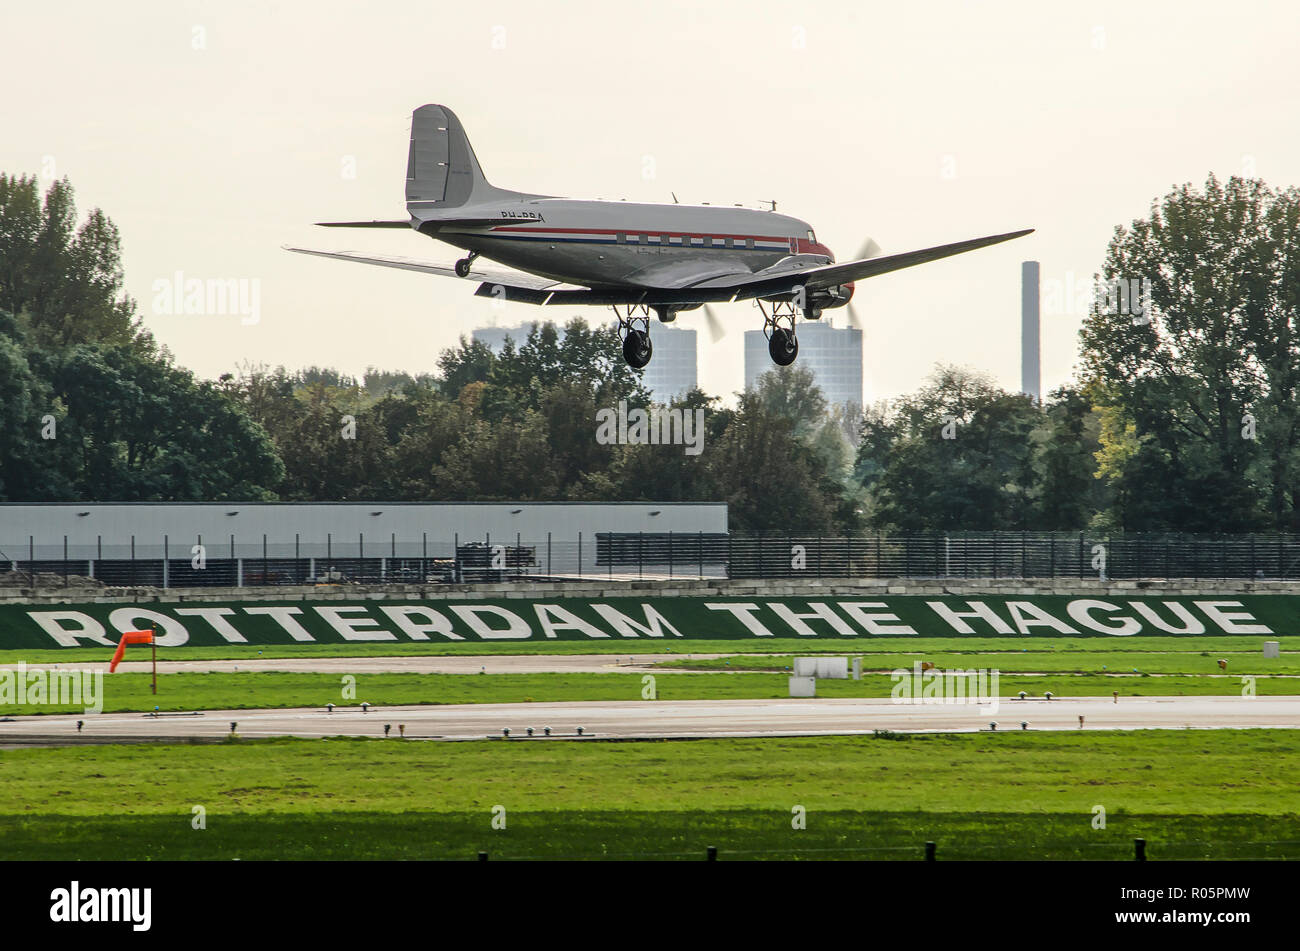 Rotterdam, The Netherlands, October 20, 2018: Small plane landing at Rotterdam The Hague airport, with a section of the city's skyline in the backgrou Stock Photo